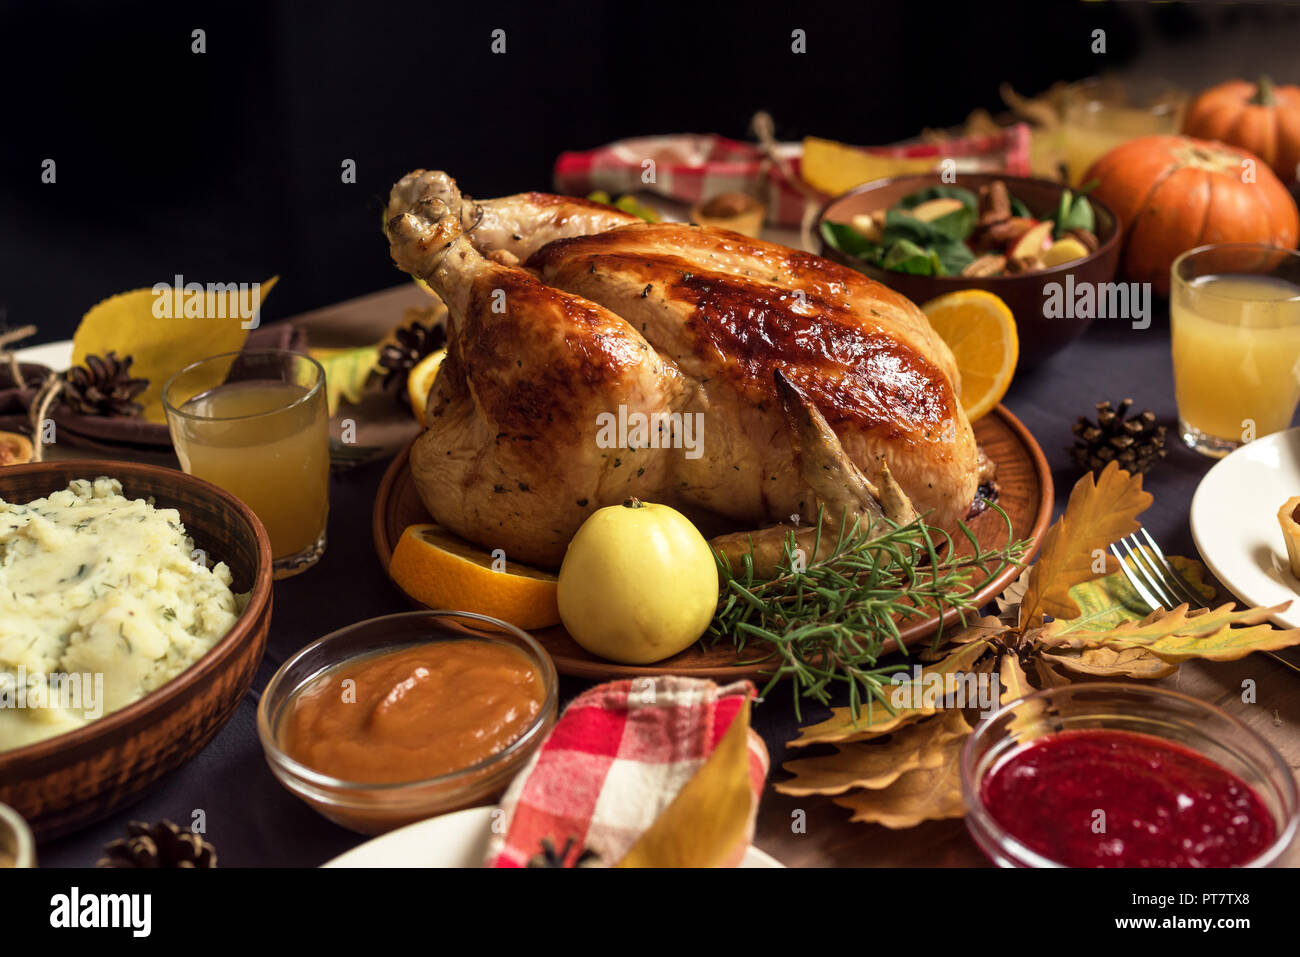 Thanksgiving Turkey Dinner with All the Sides. Homemade Roasted Turkey on Festive Thanksgiving table. Stock Photo